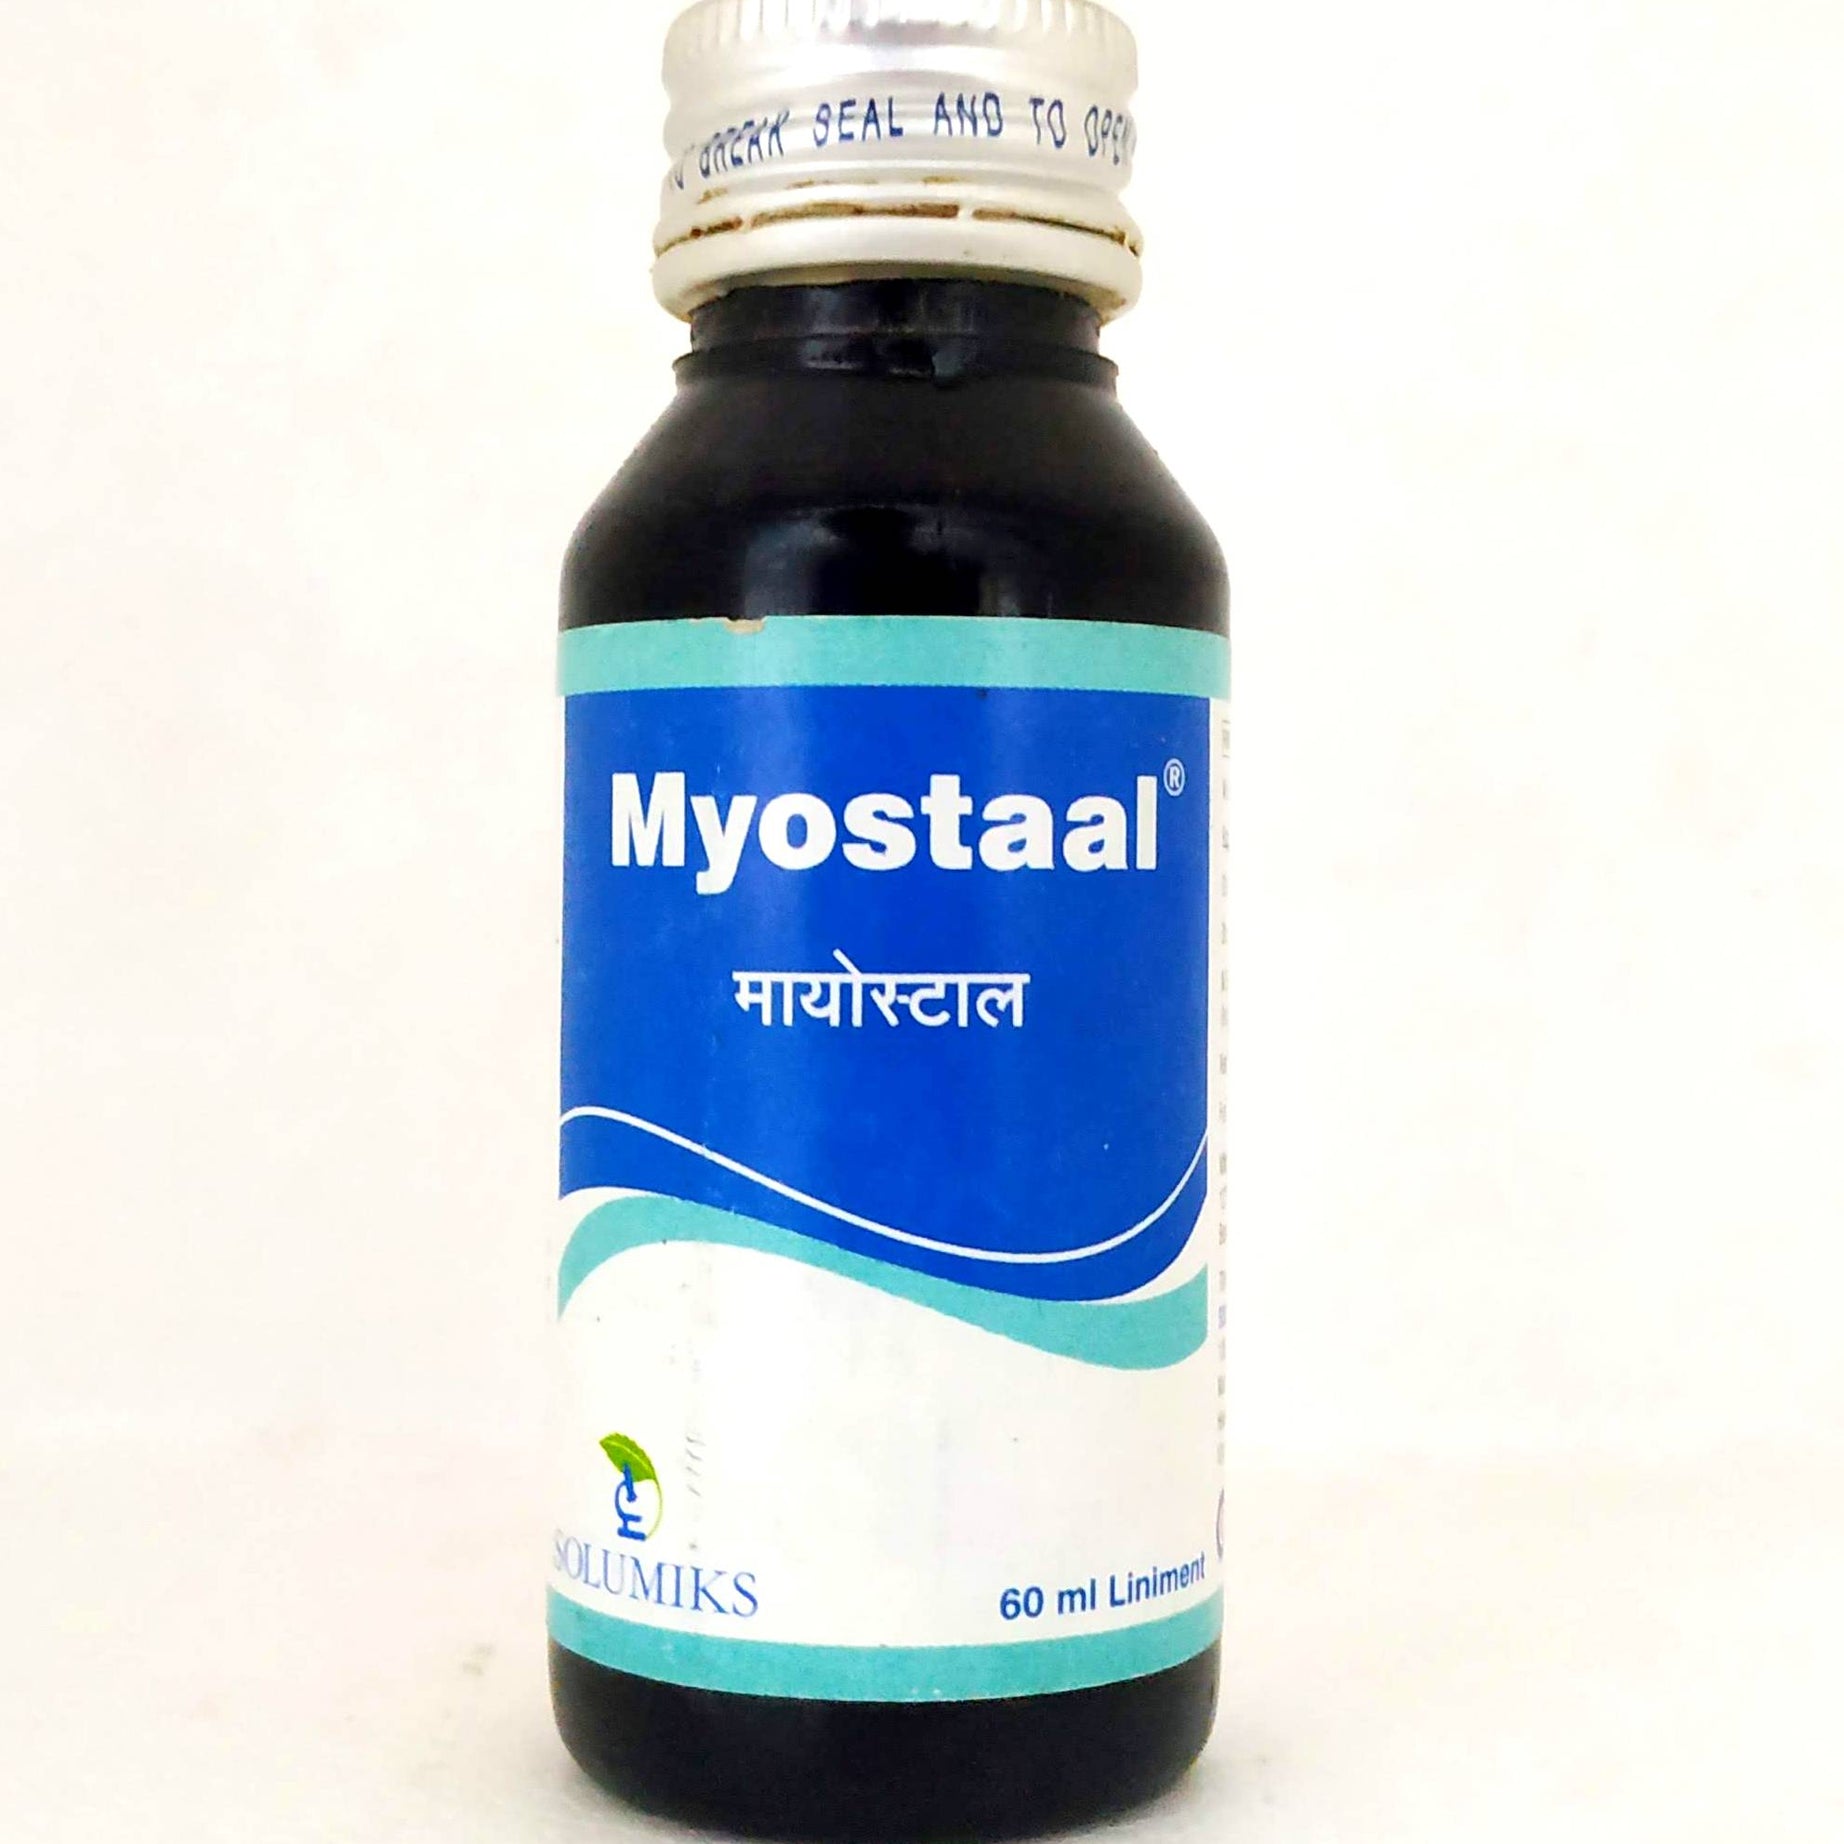 Shop Myostaal Liniment Oil 60ml at price 160.00 from Solumiks Online - Ayush Care